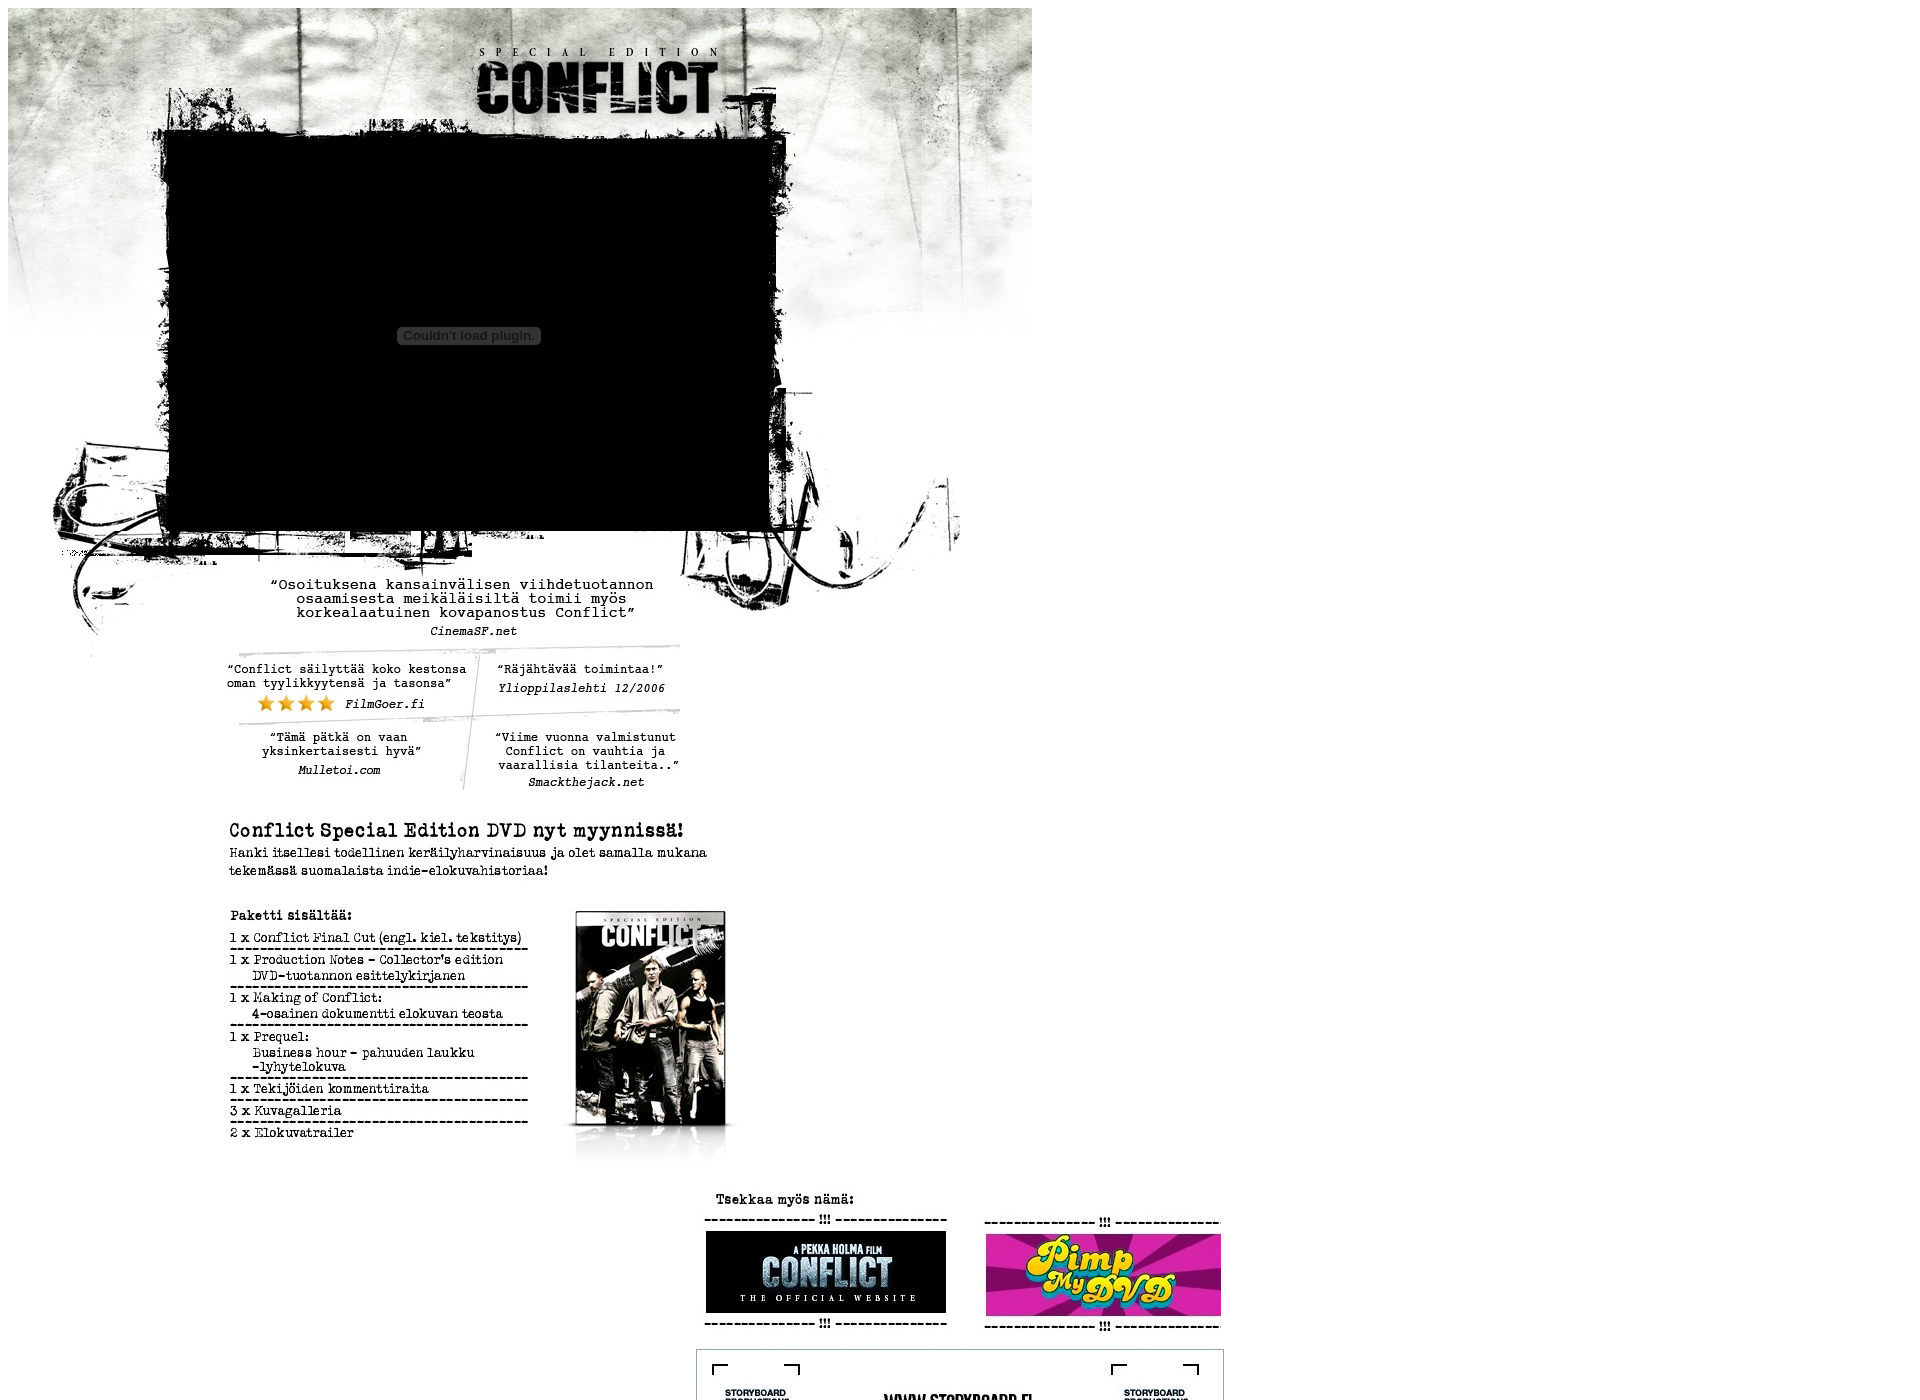 Screenshot for conflict.fi